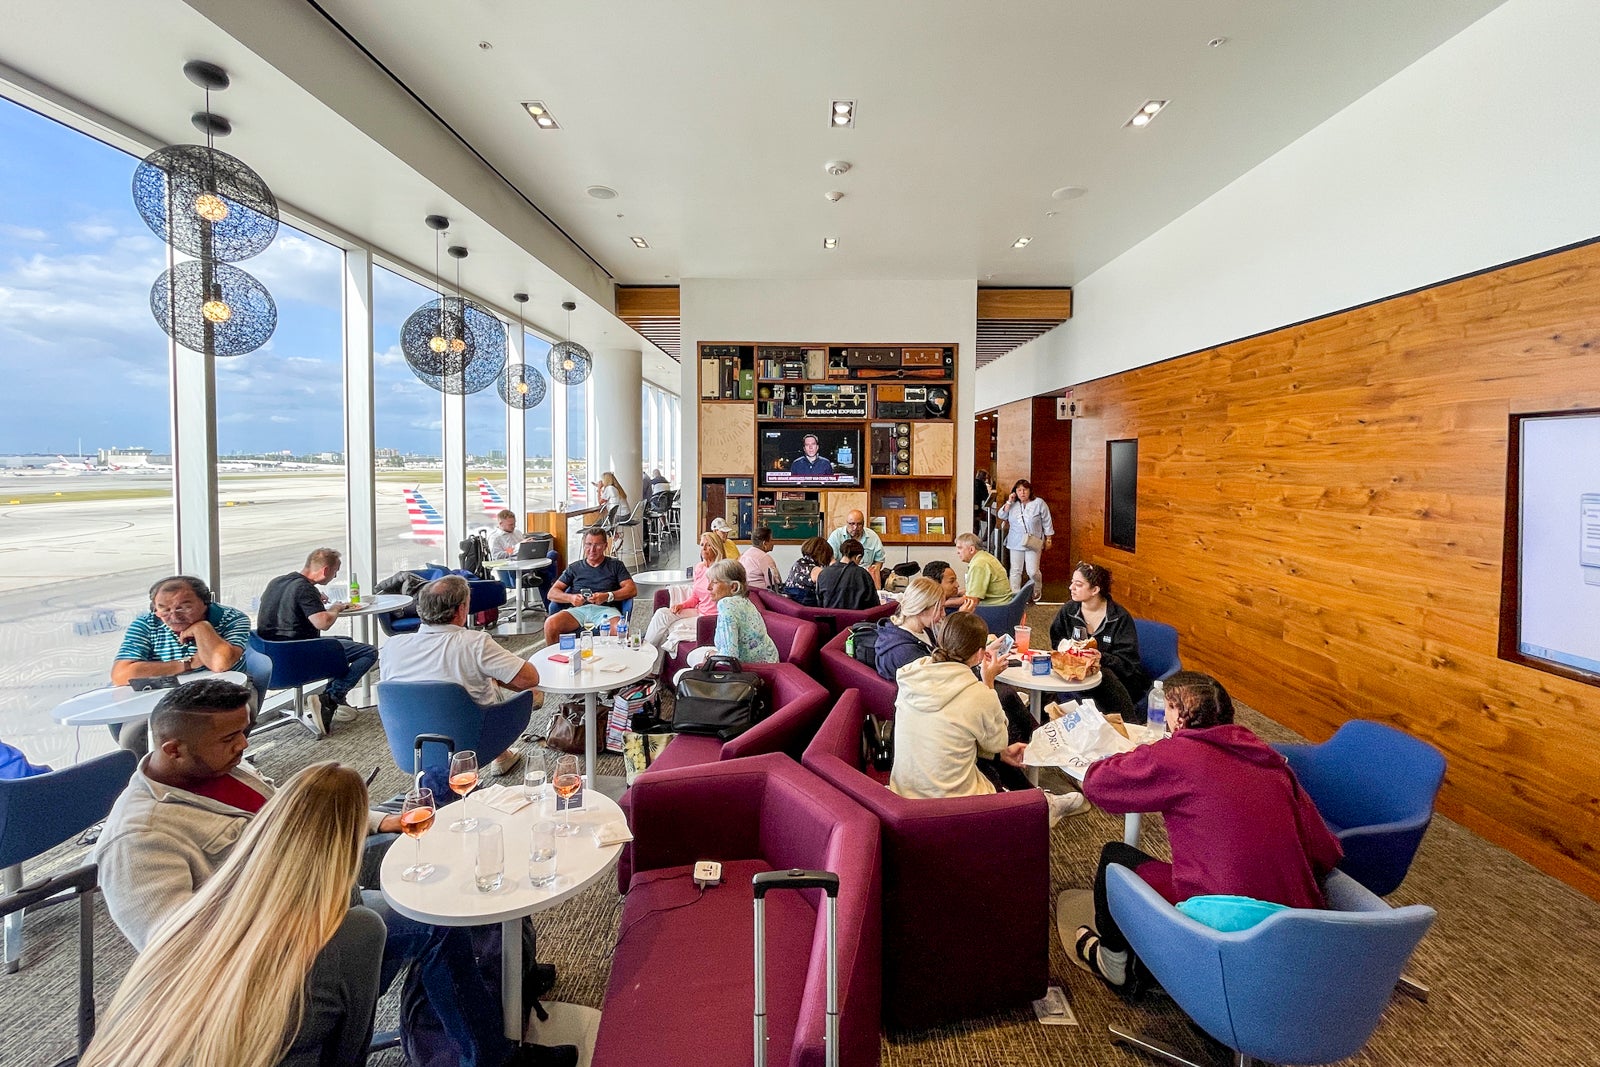 Choosing the best airport lounge at MIA — and how you can get inside